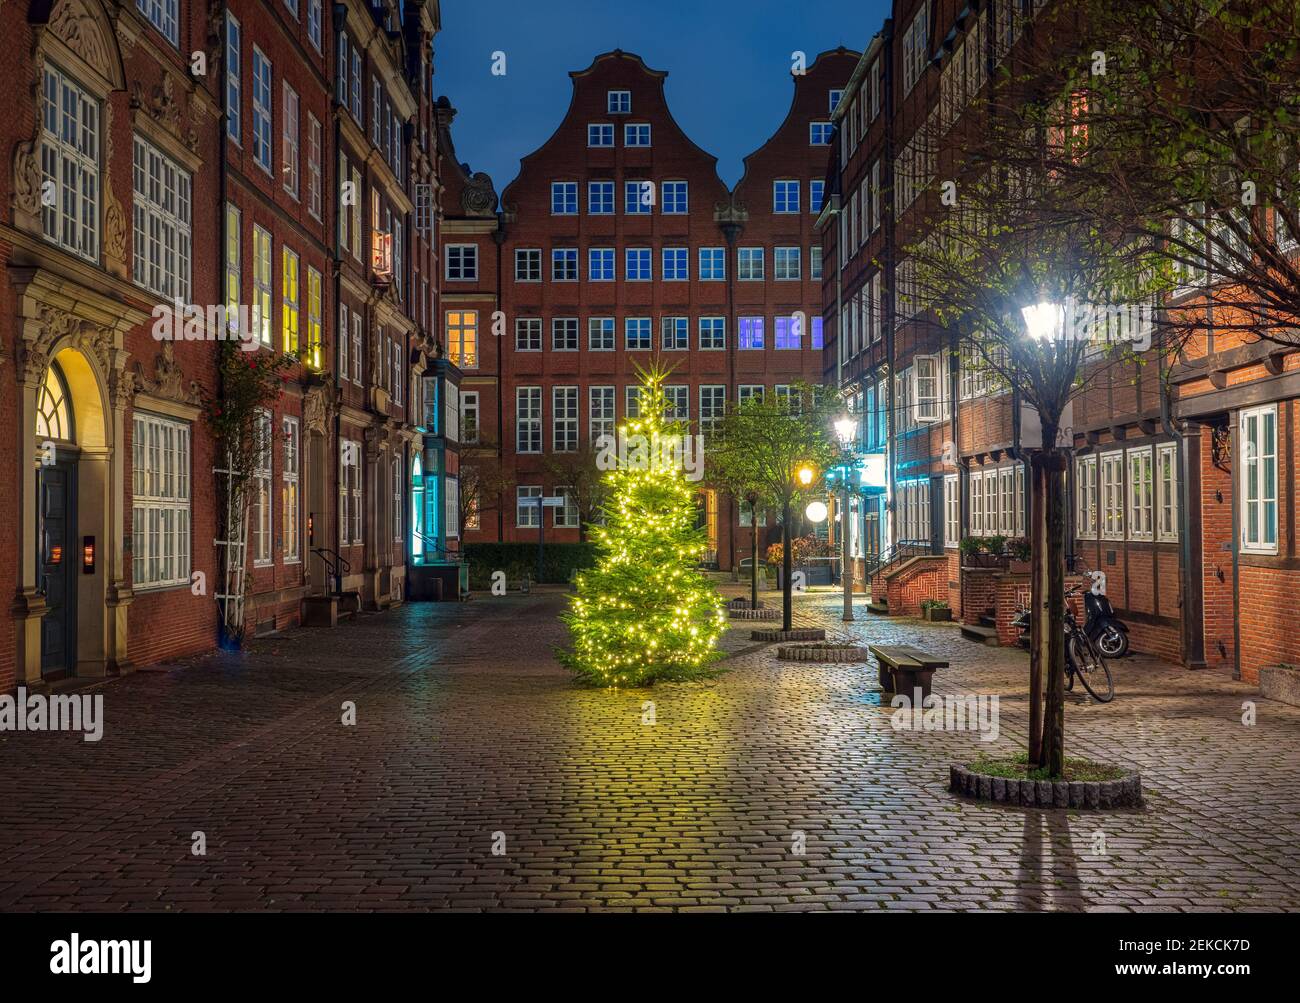 Germany, Hamburg, Composers Quarter and Christmas decorations in city street Stock Photo